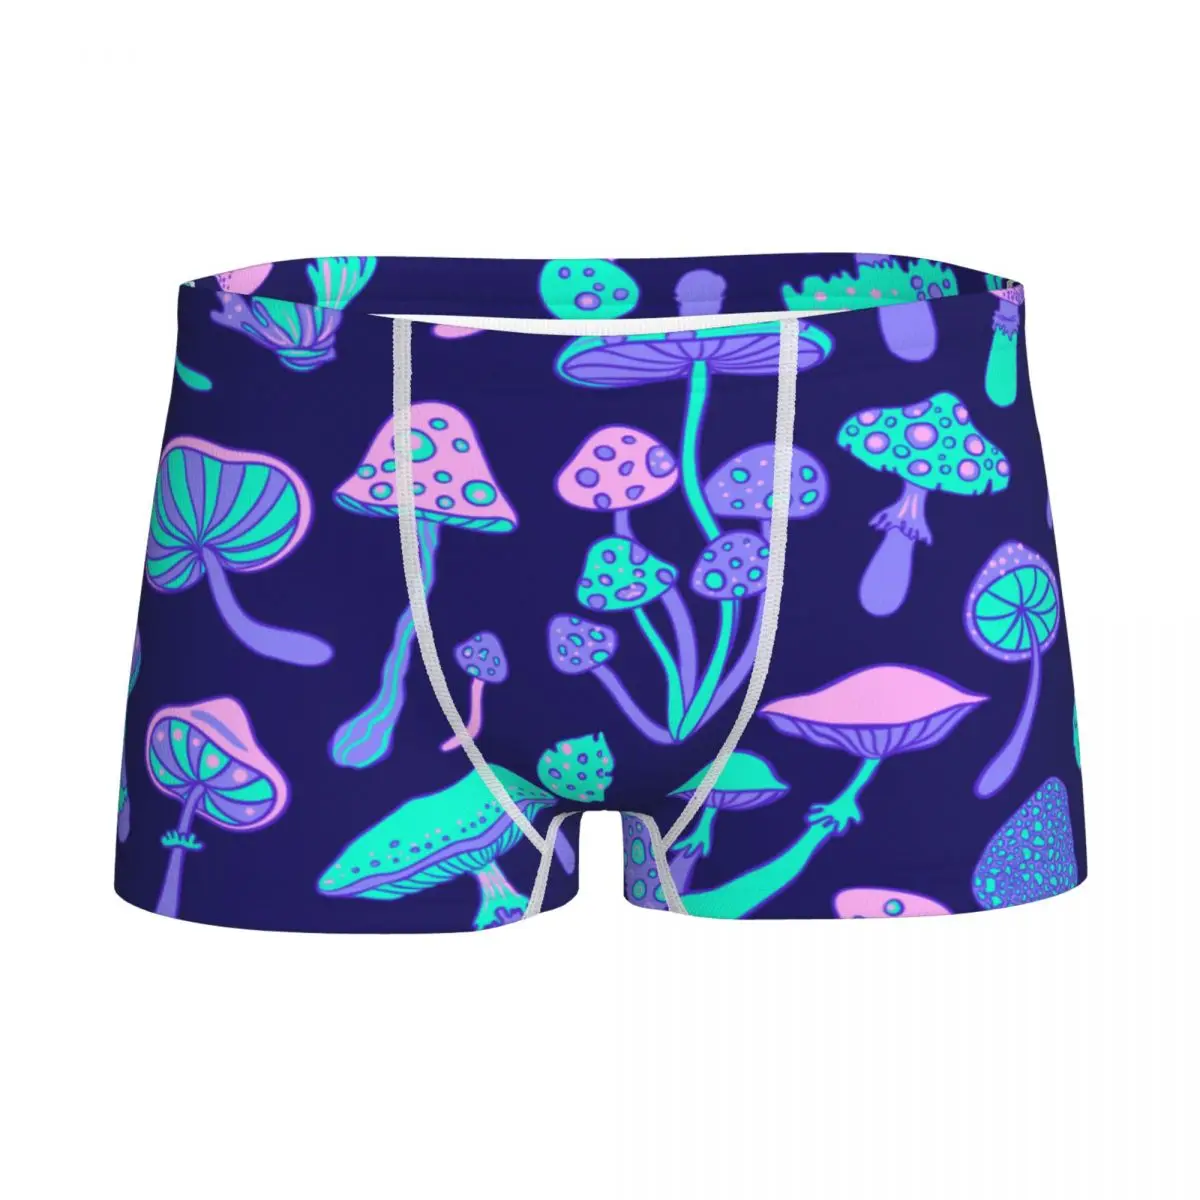 

Children's Boys Underwear Magic Mushrooms Youth Panties Boxers Psychedelic Hippie Teenagers Cotton Underpants